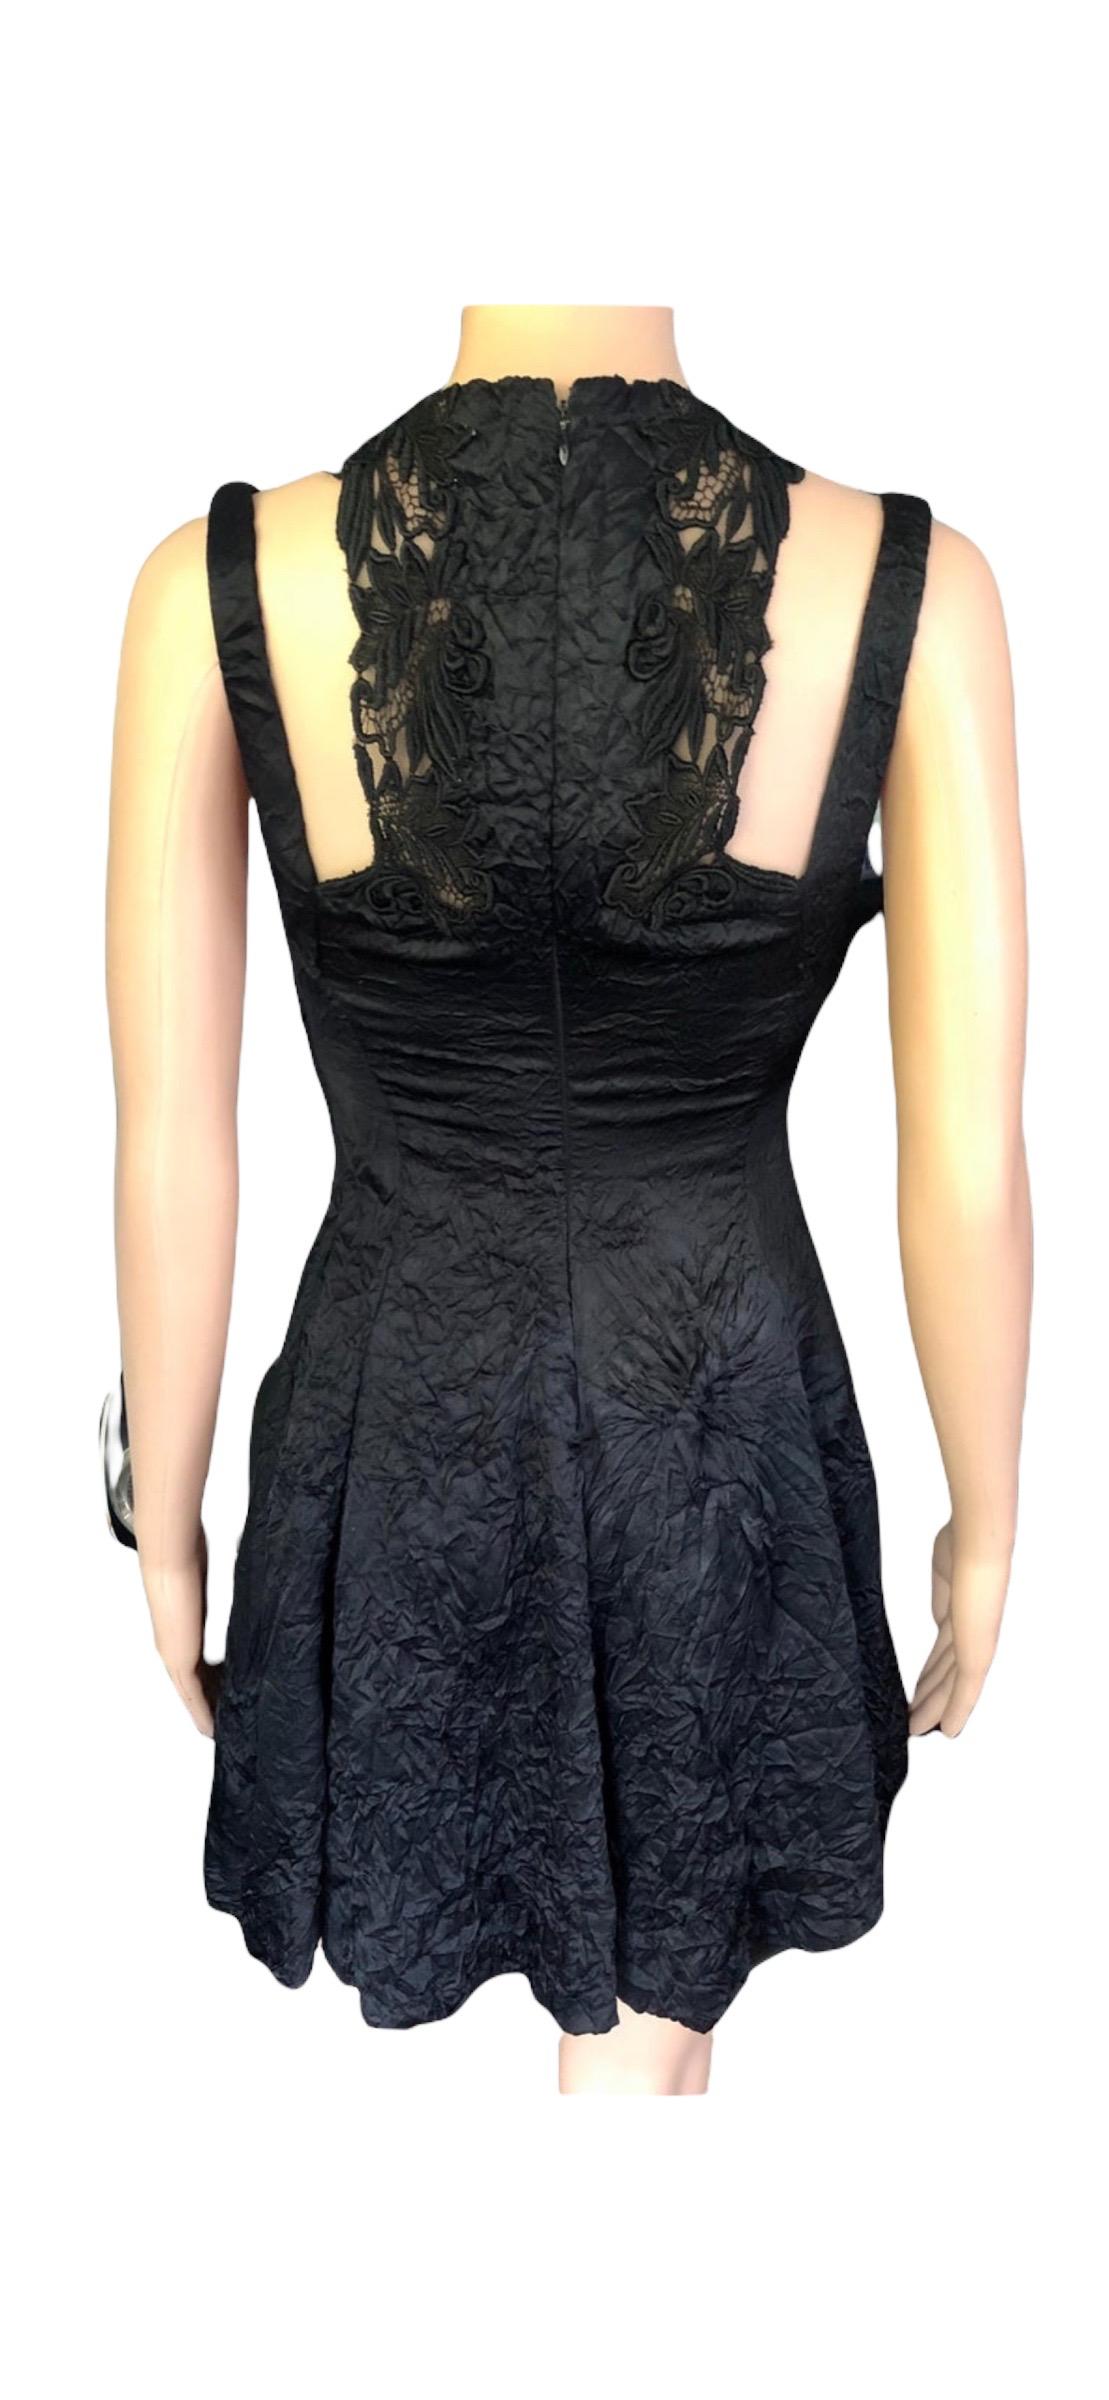 Gianni Versace S/S 1994 Runway Couture Vintage Crinkle Silk Lace Black Dress For Sale 9